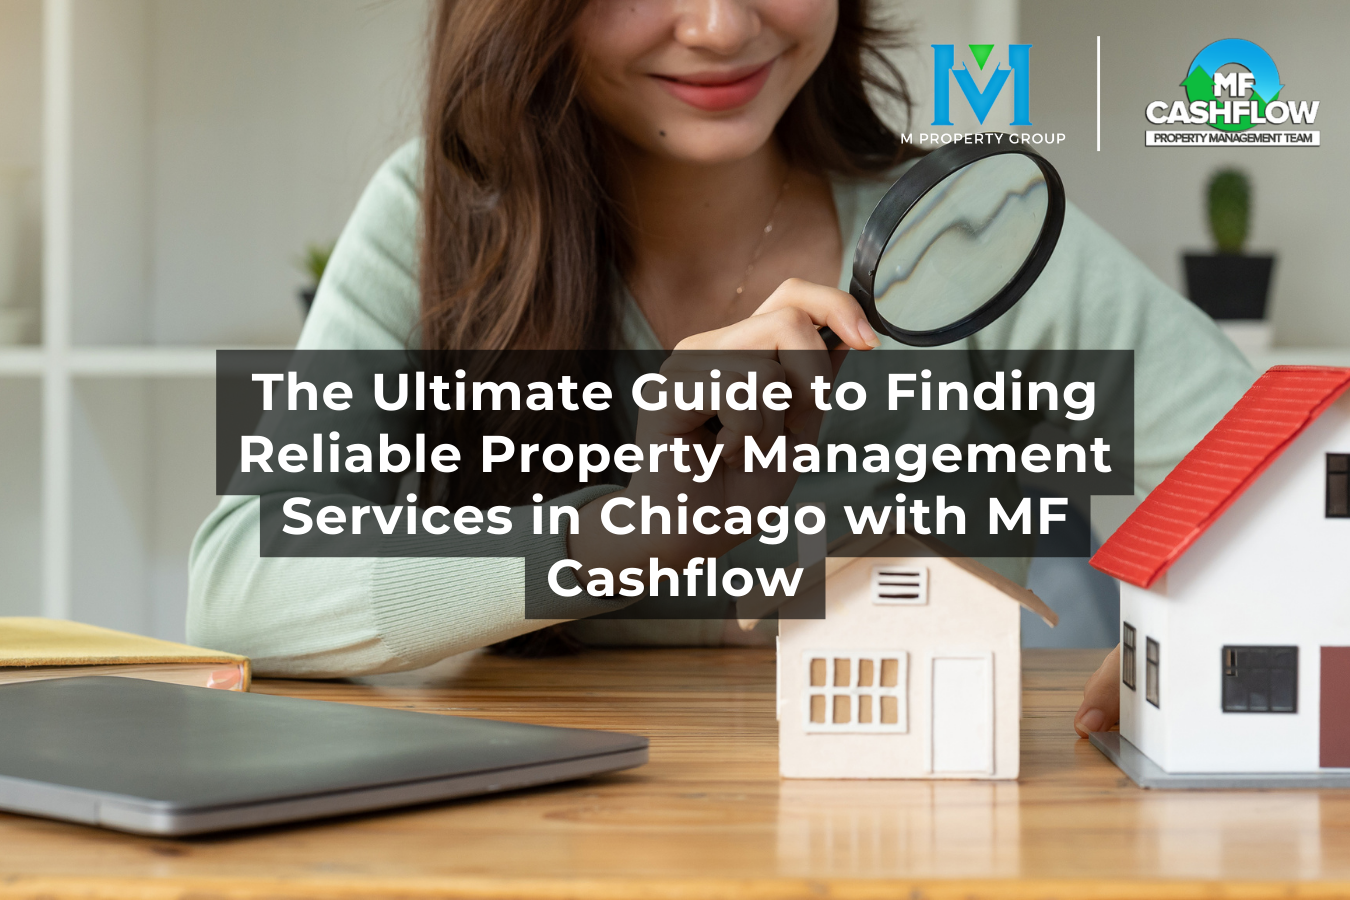 The Ultimate Guide to Finding Reliable Property Management Services in Chicago with MF Cashflow